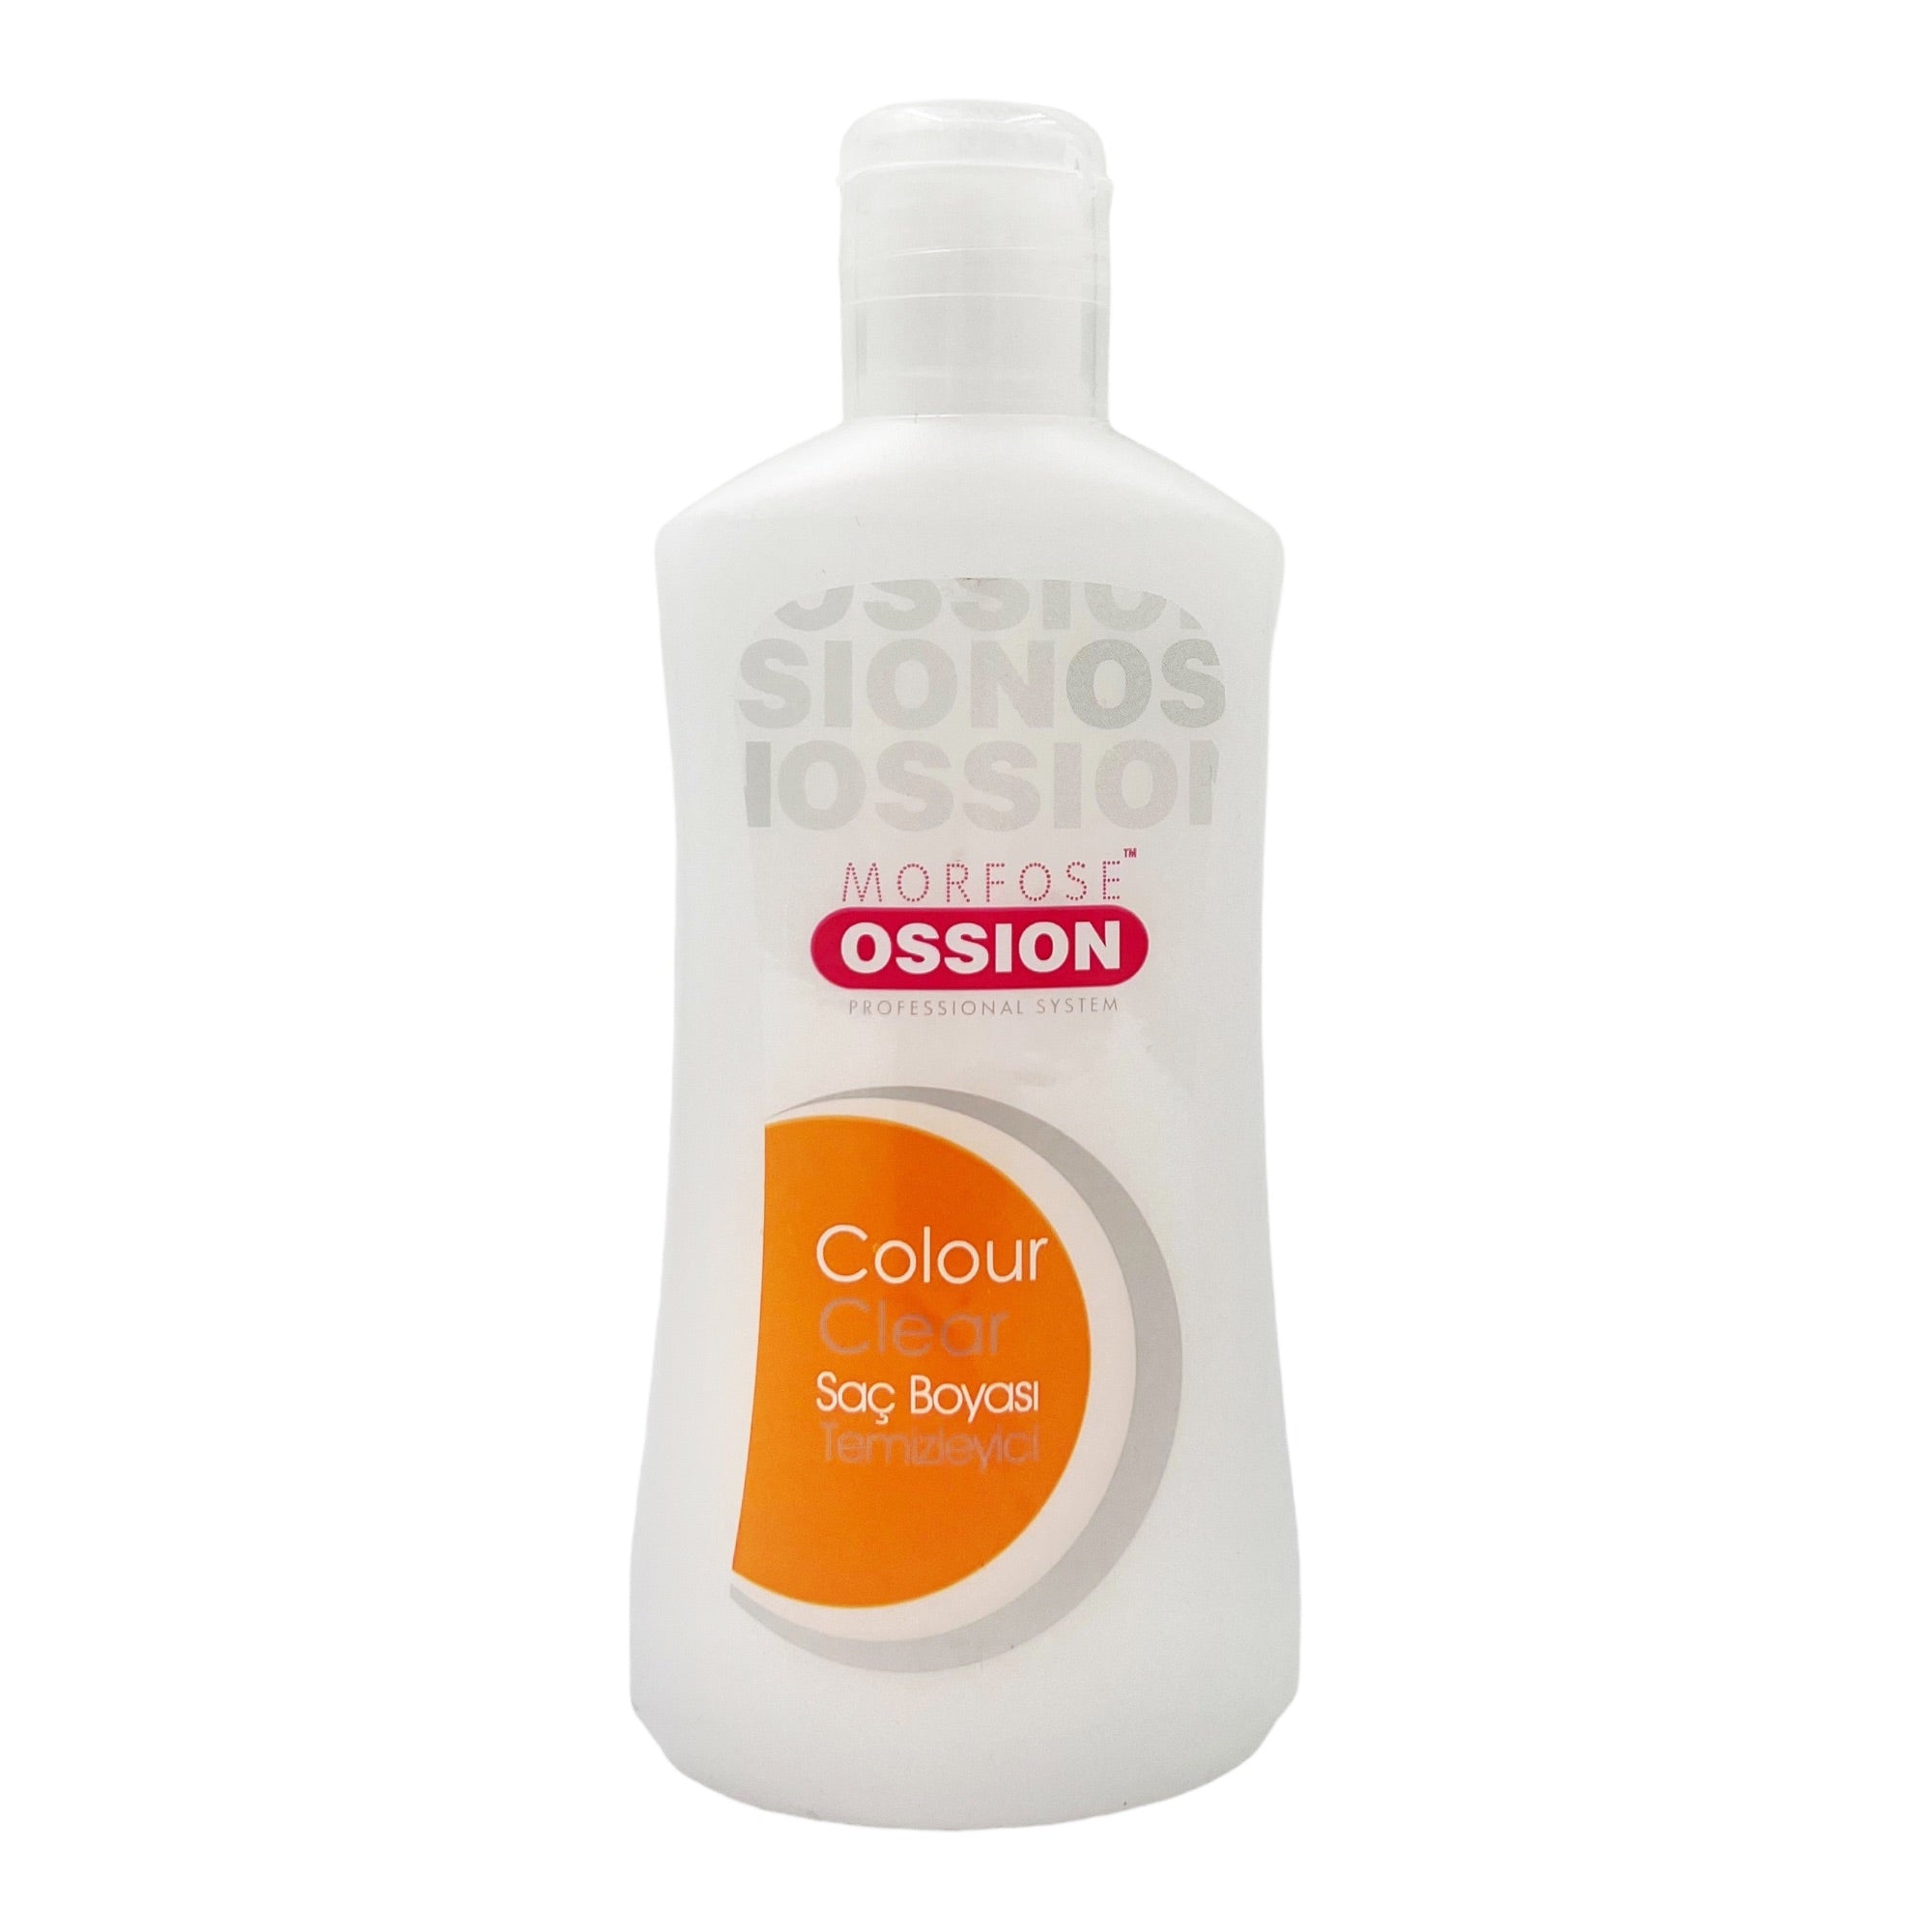 Morfose - Ossion Colour Clear 200ml